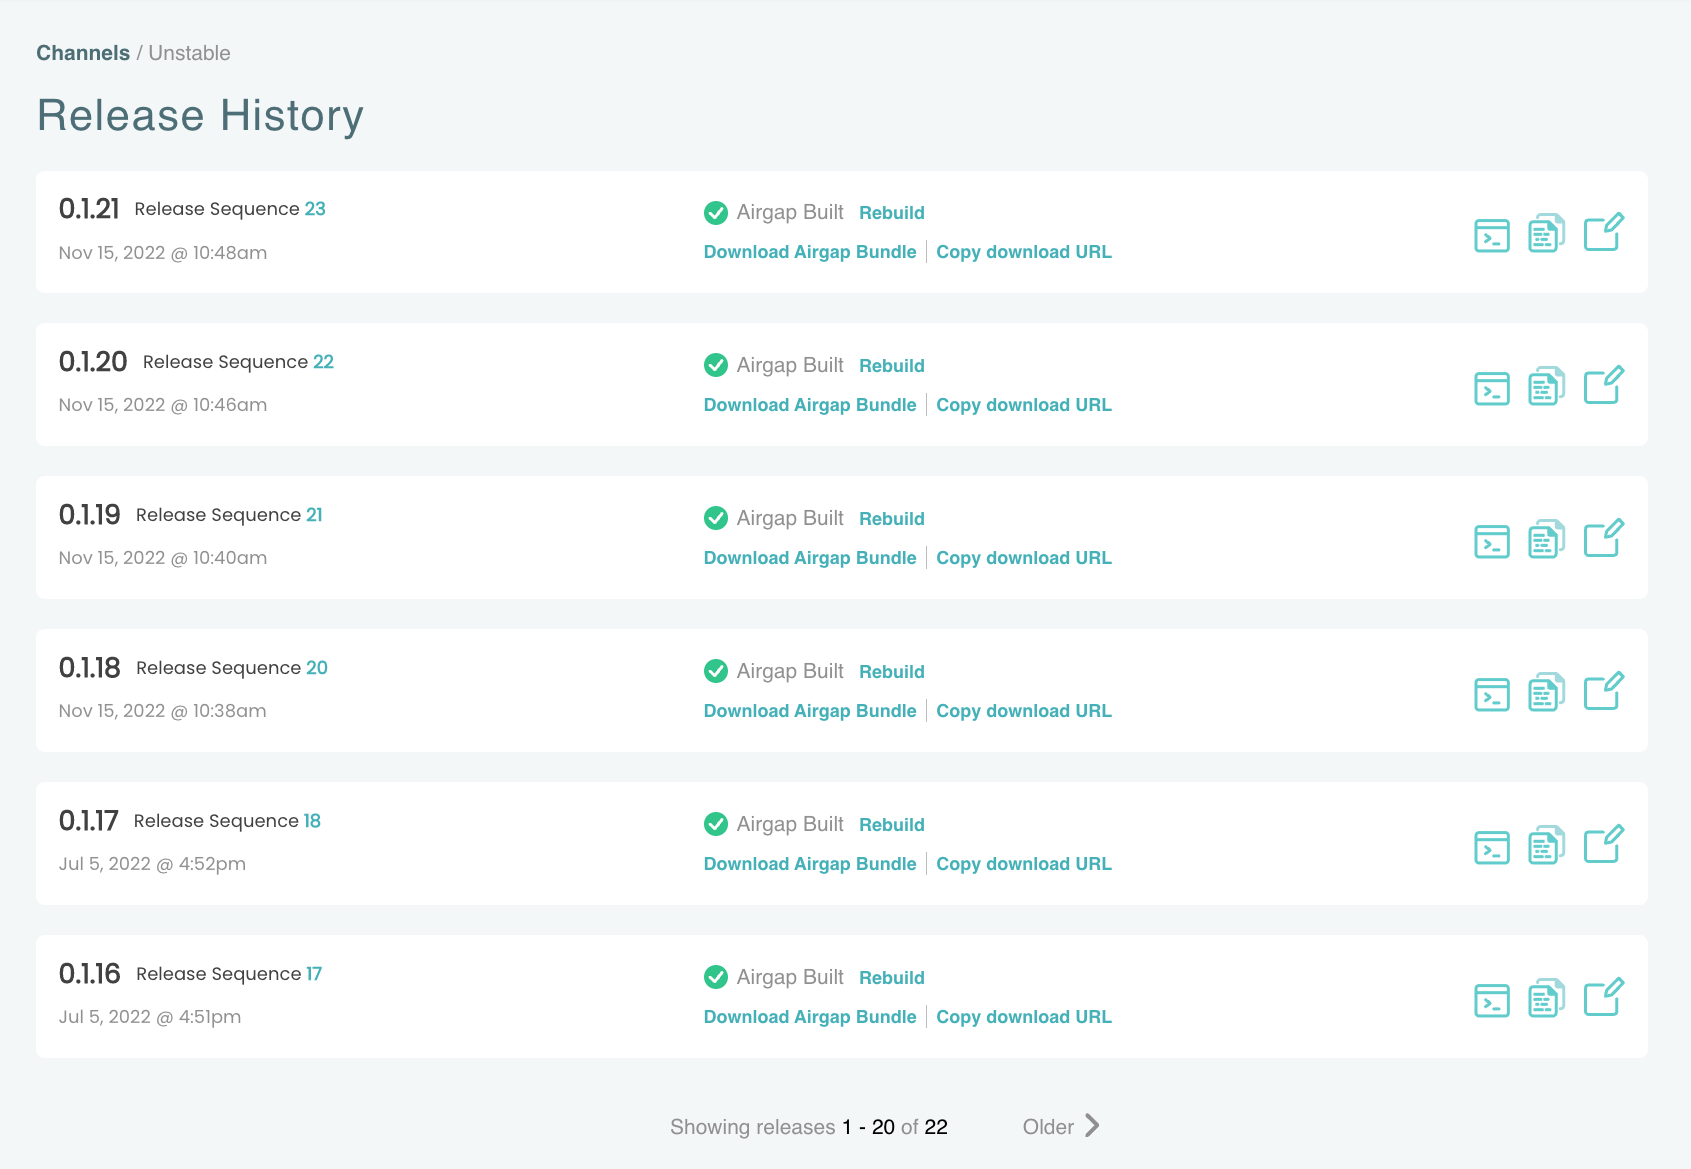 Release history page in the vendor portal